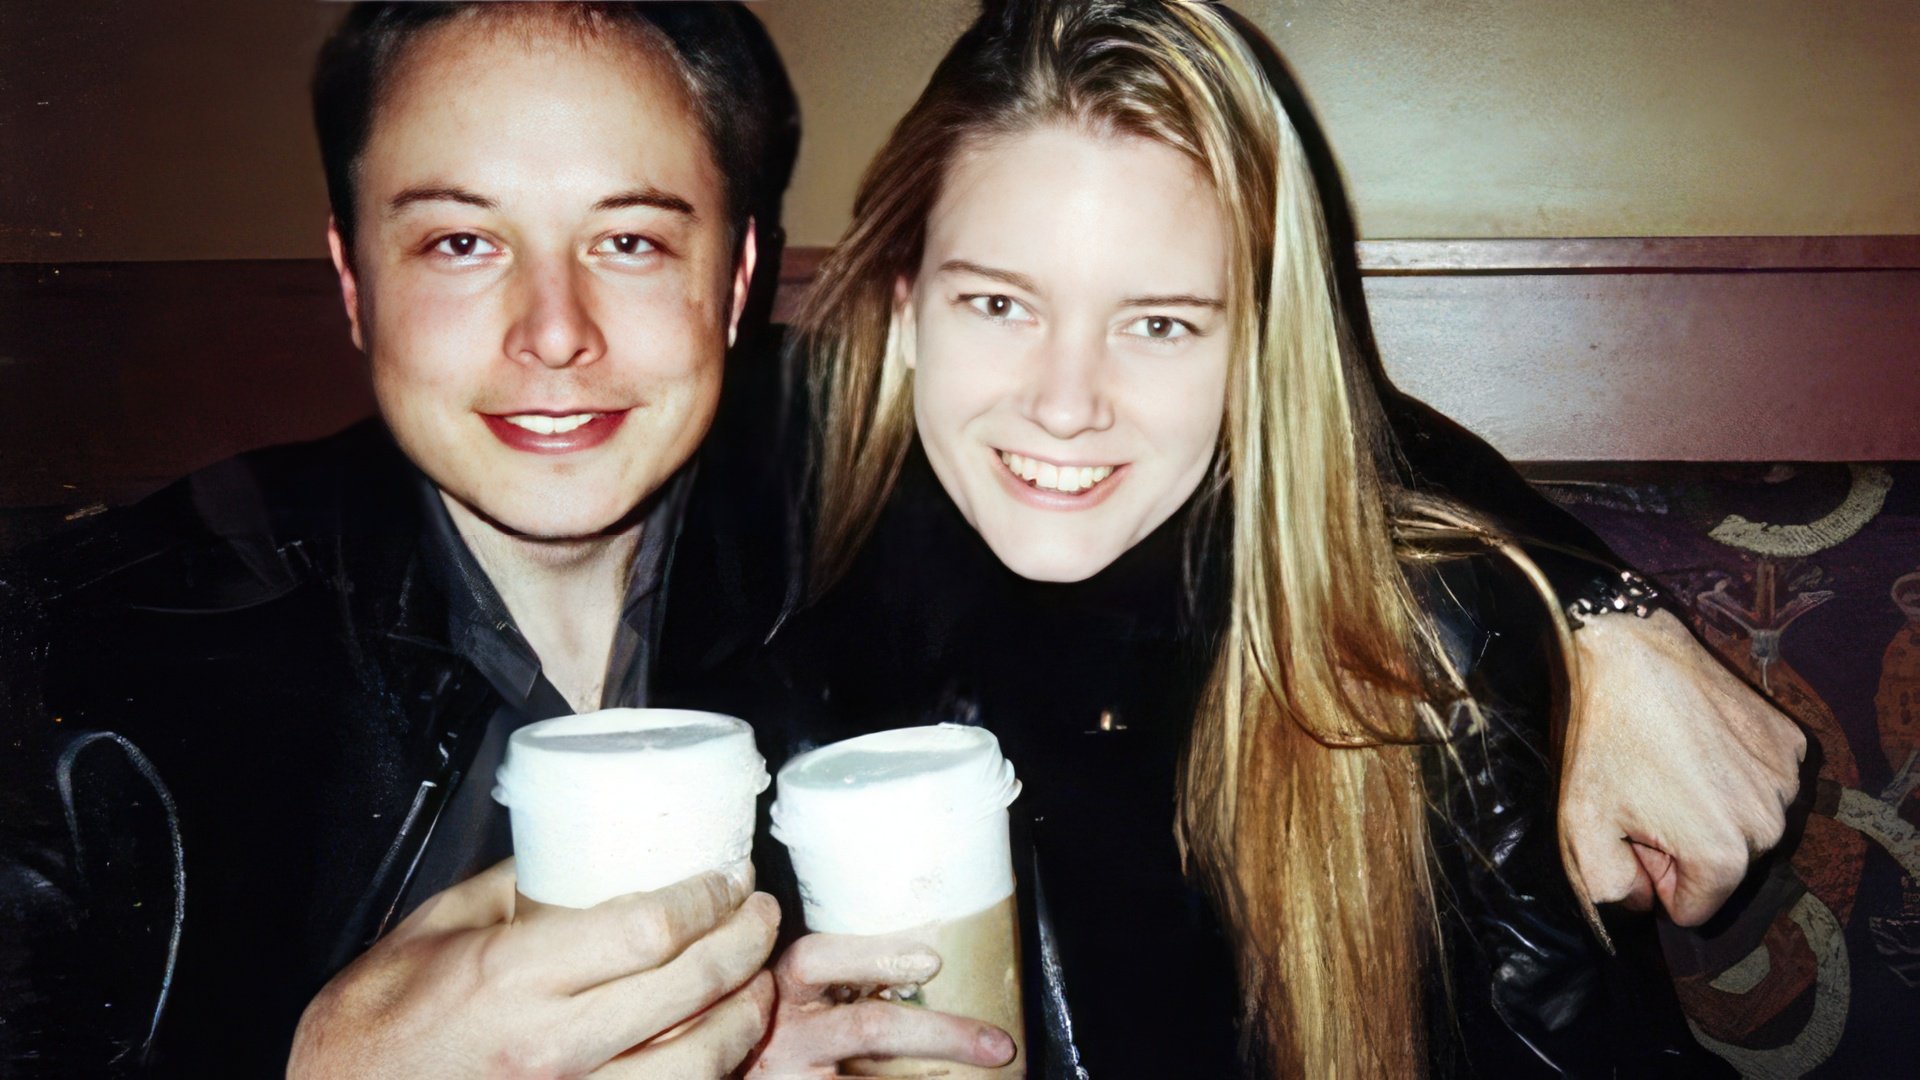 Elon Musk and his wife Justine in their youth